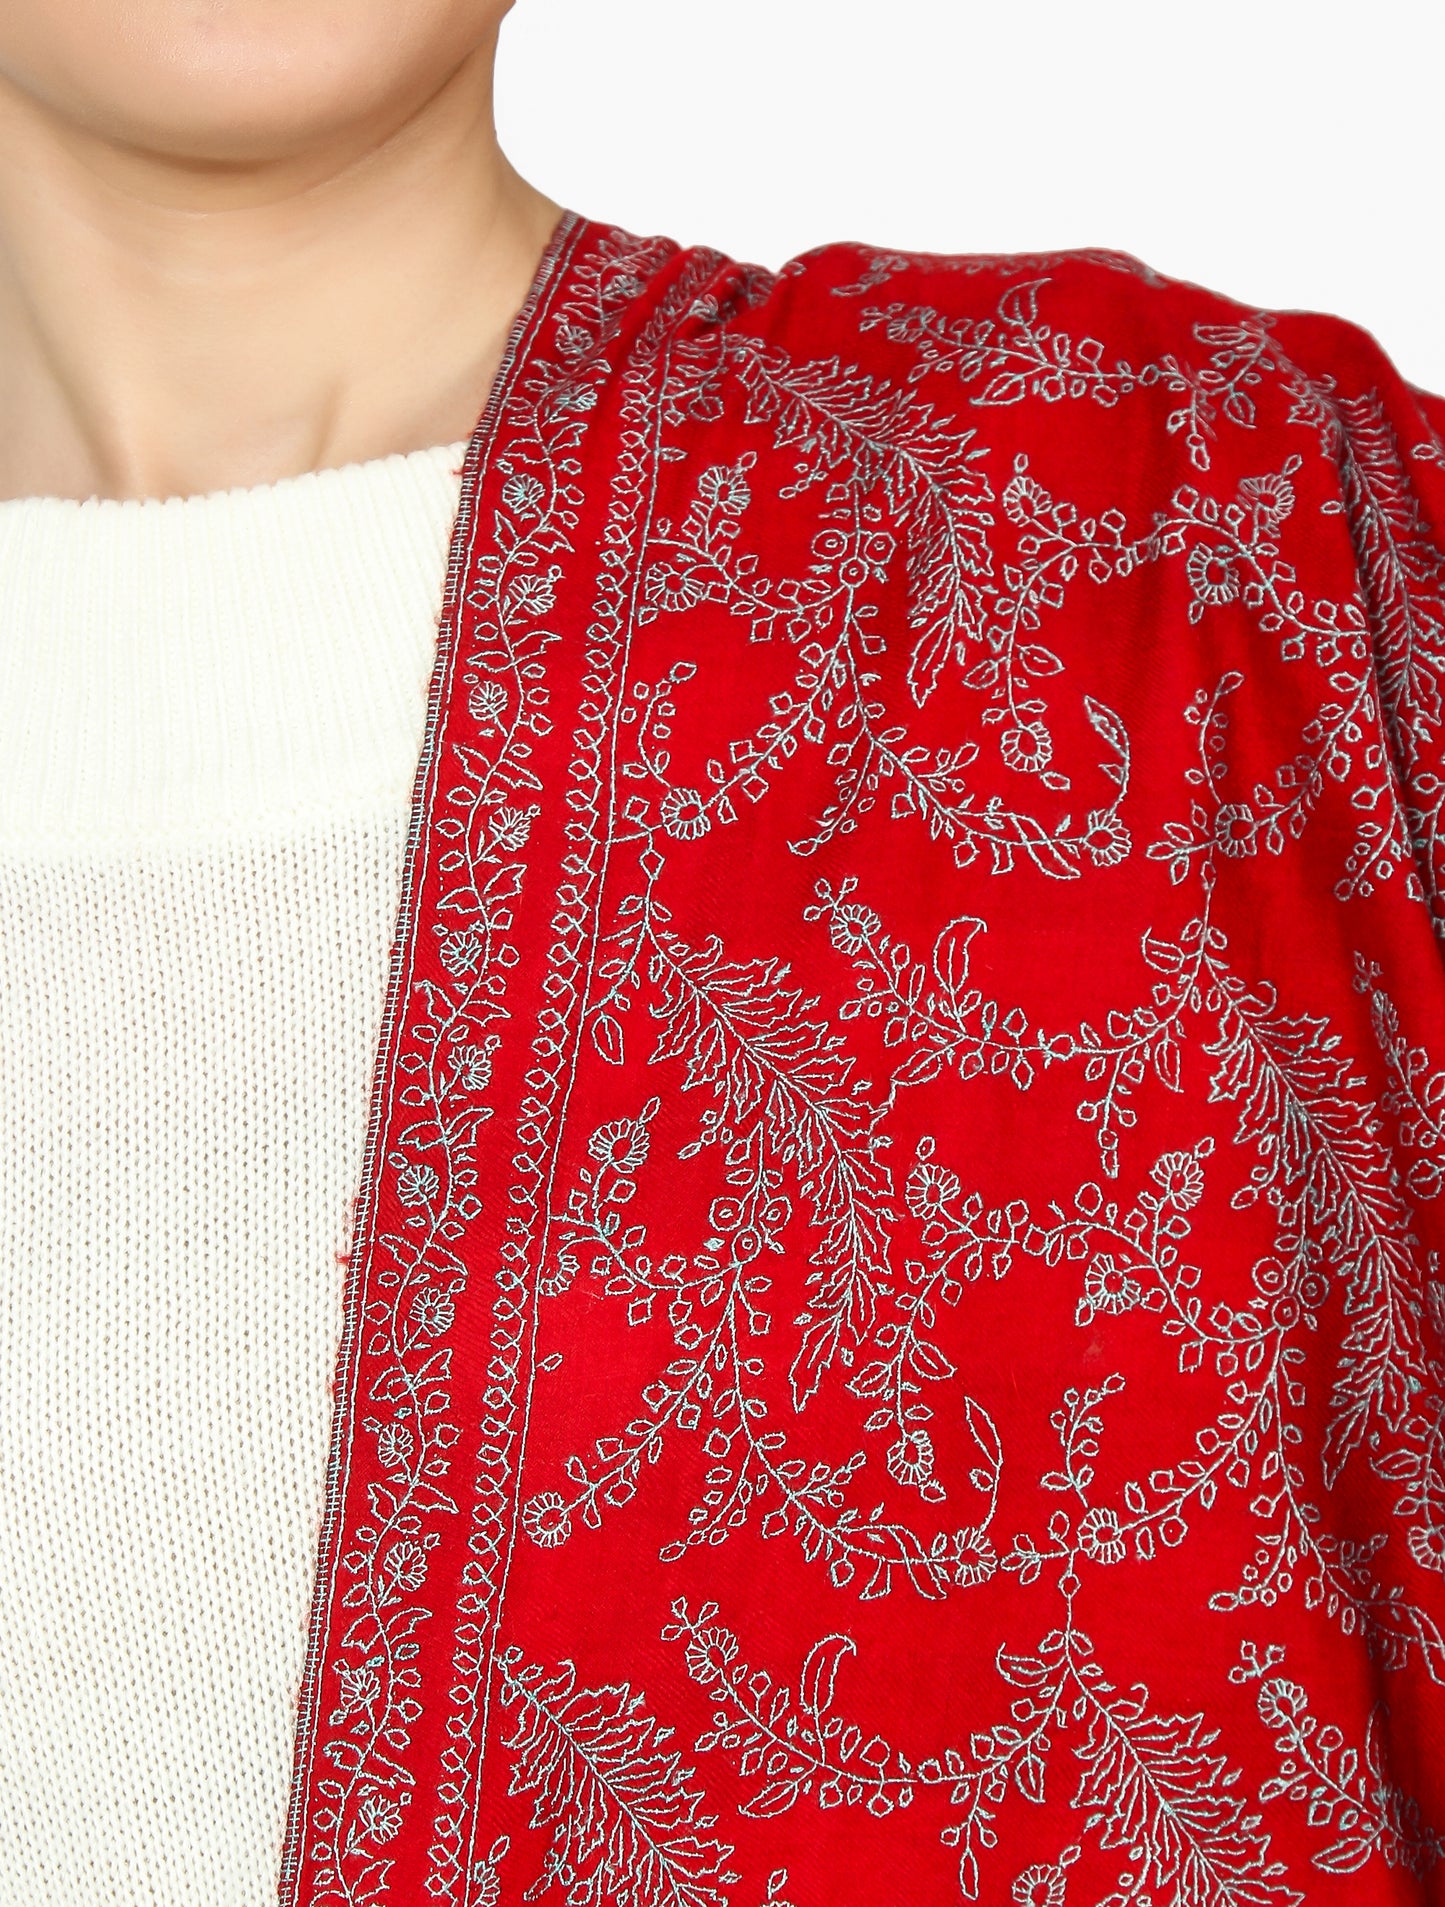 Cashmere Pashmina Shawl Embroidered (Deep Red)